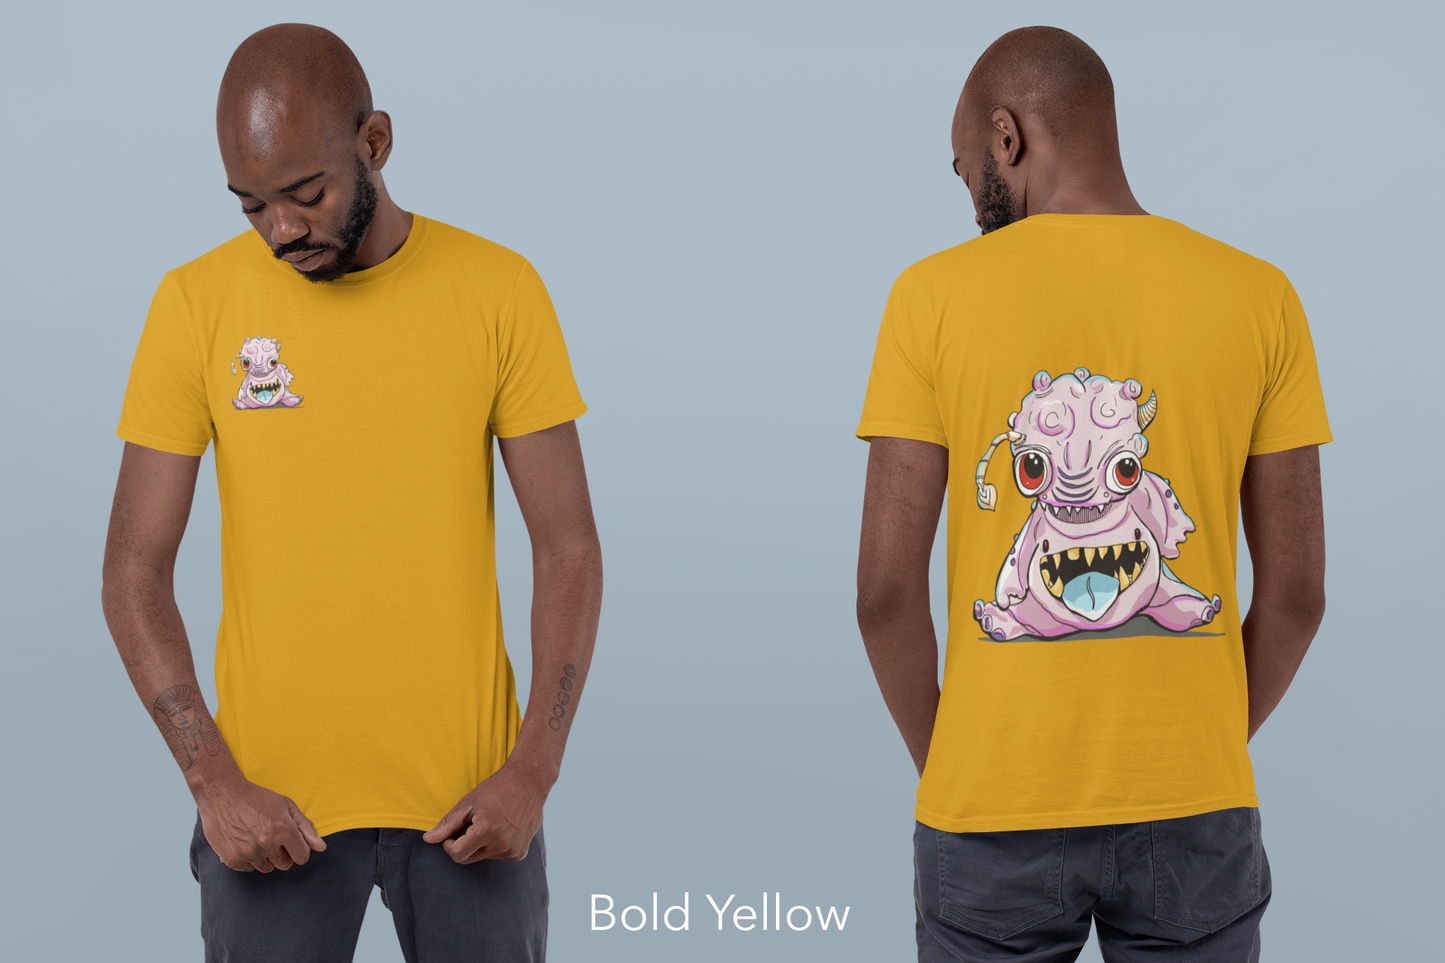 front and back shot of a dark skinned man in a bright golden shirt. With a pink bublegum looking alien creature on the front and back of the shirt The creature full back shirt display and small "pocket" display on the front